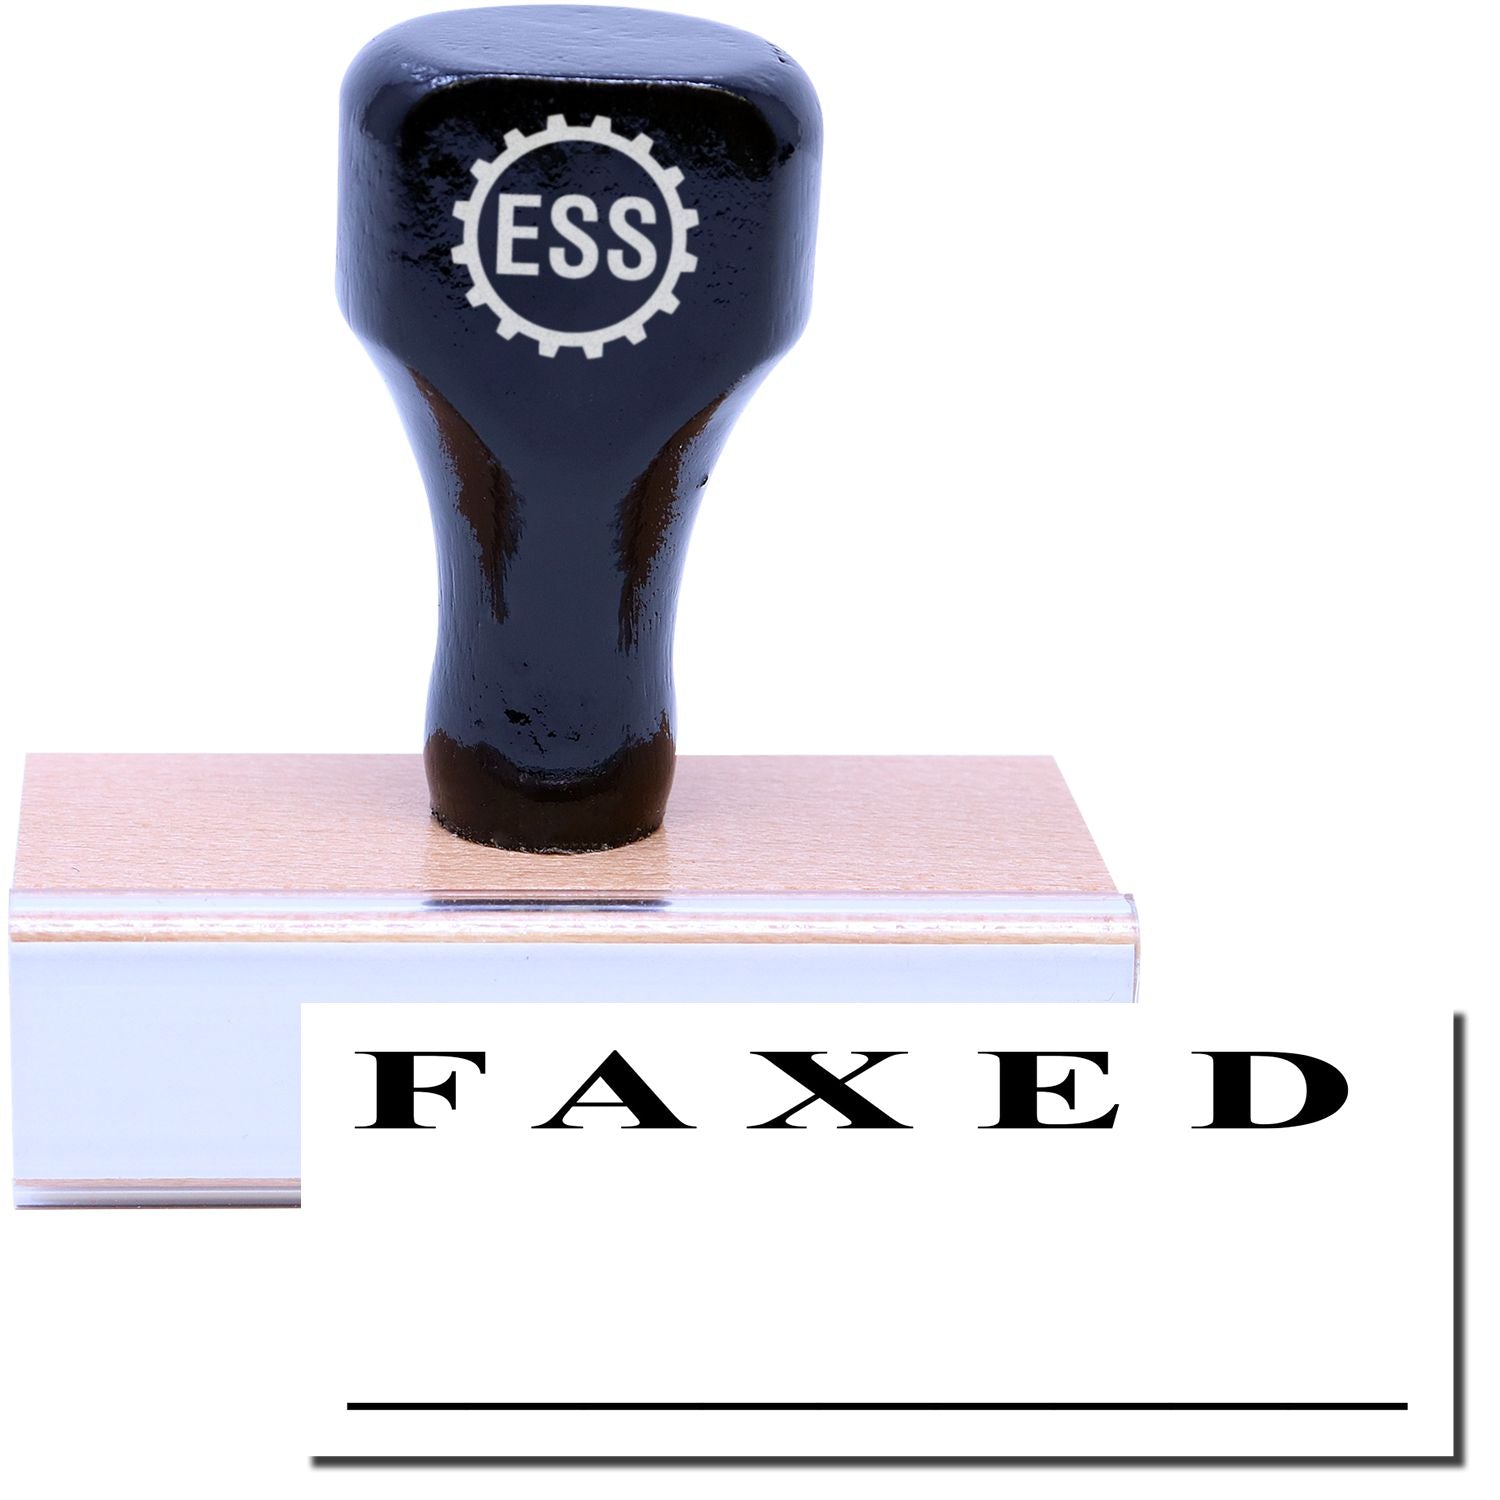 A stock office rubber stamp with a stamped image showing how the text "FAXED" in a two-lined large font is displayed after stamping.